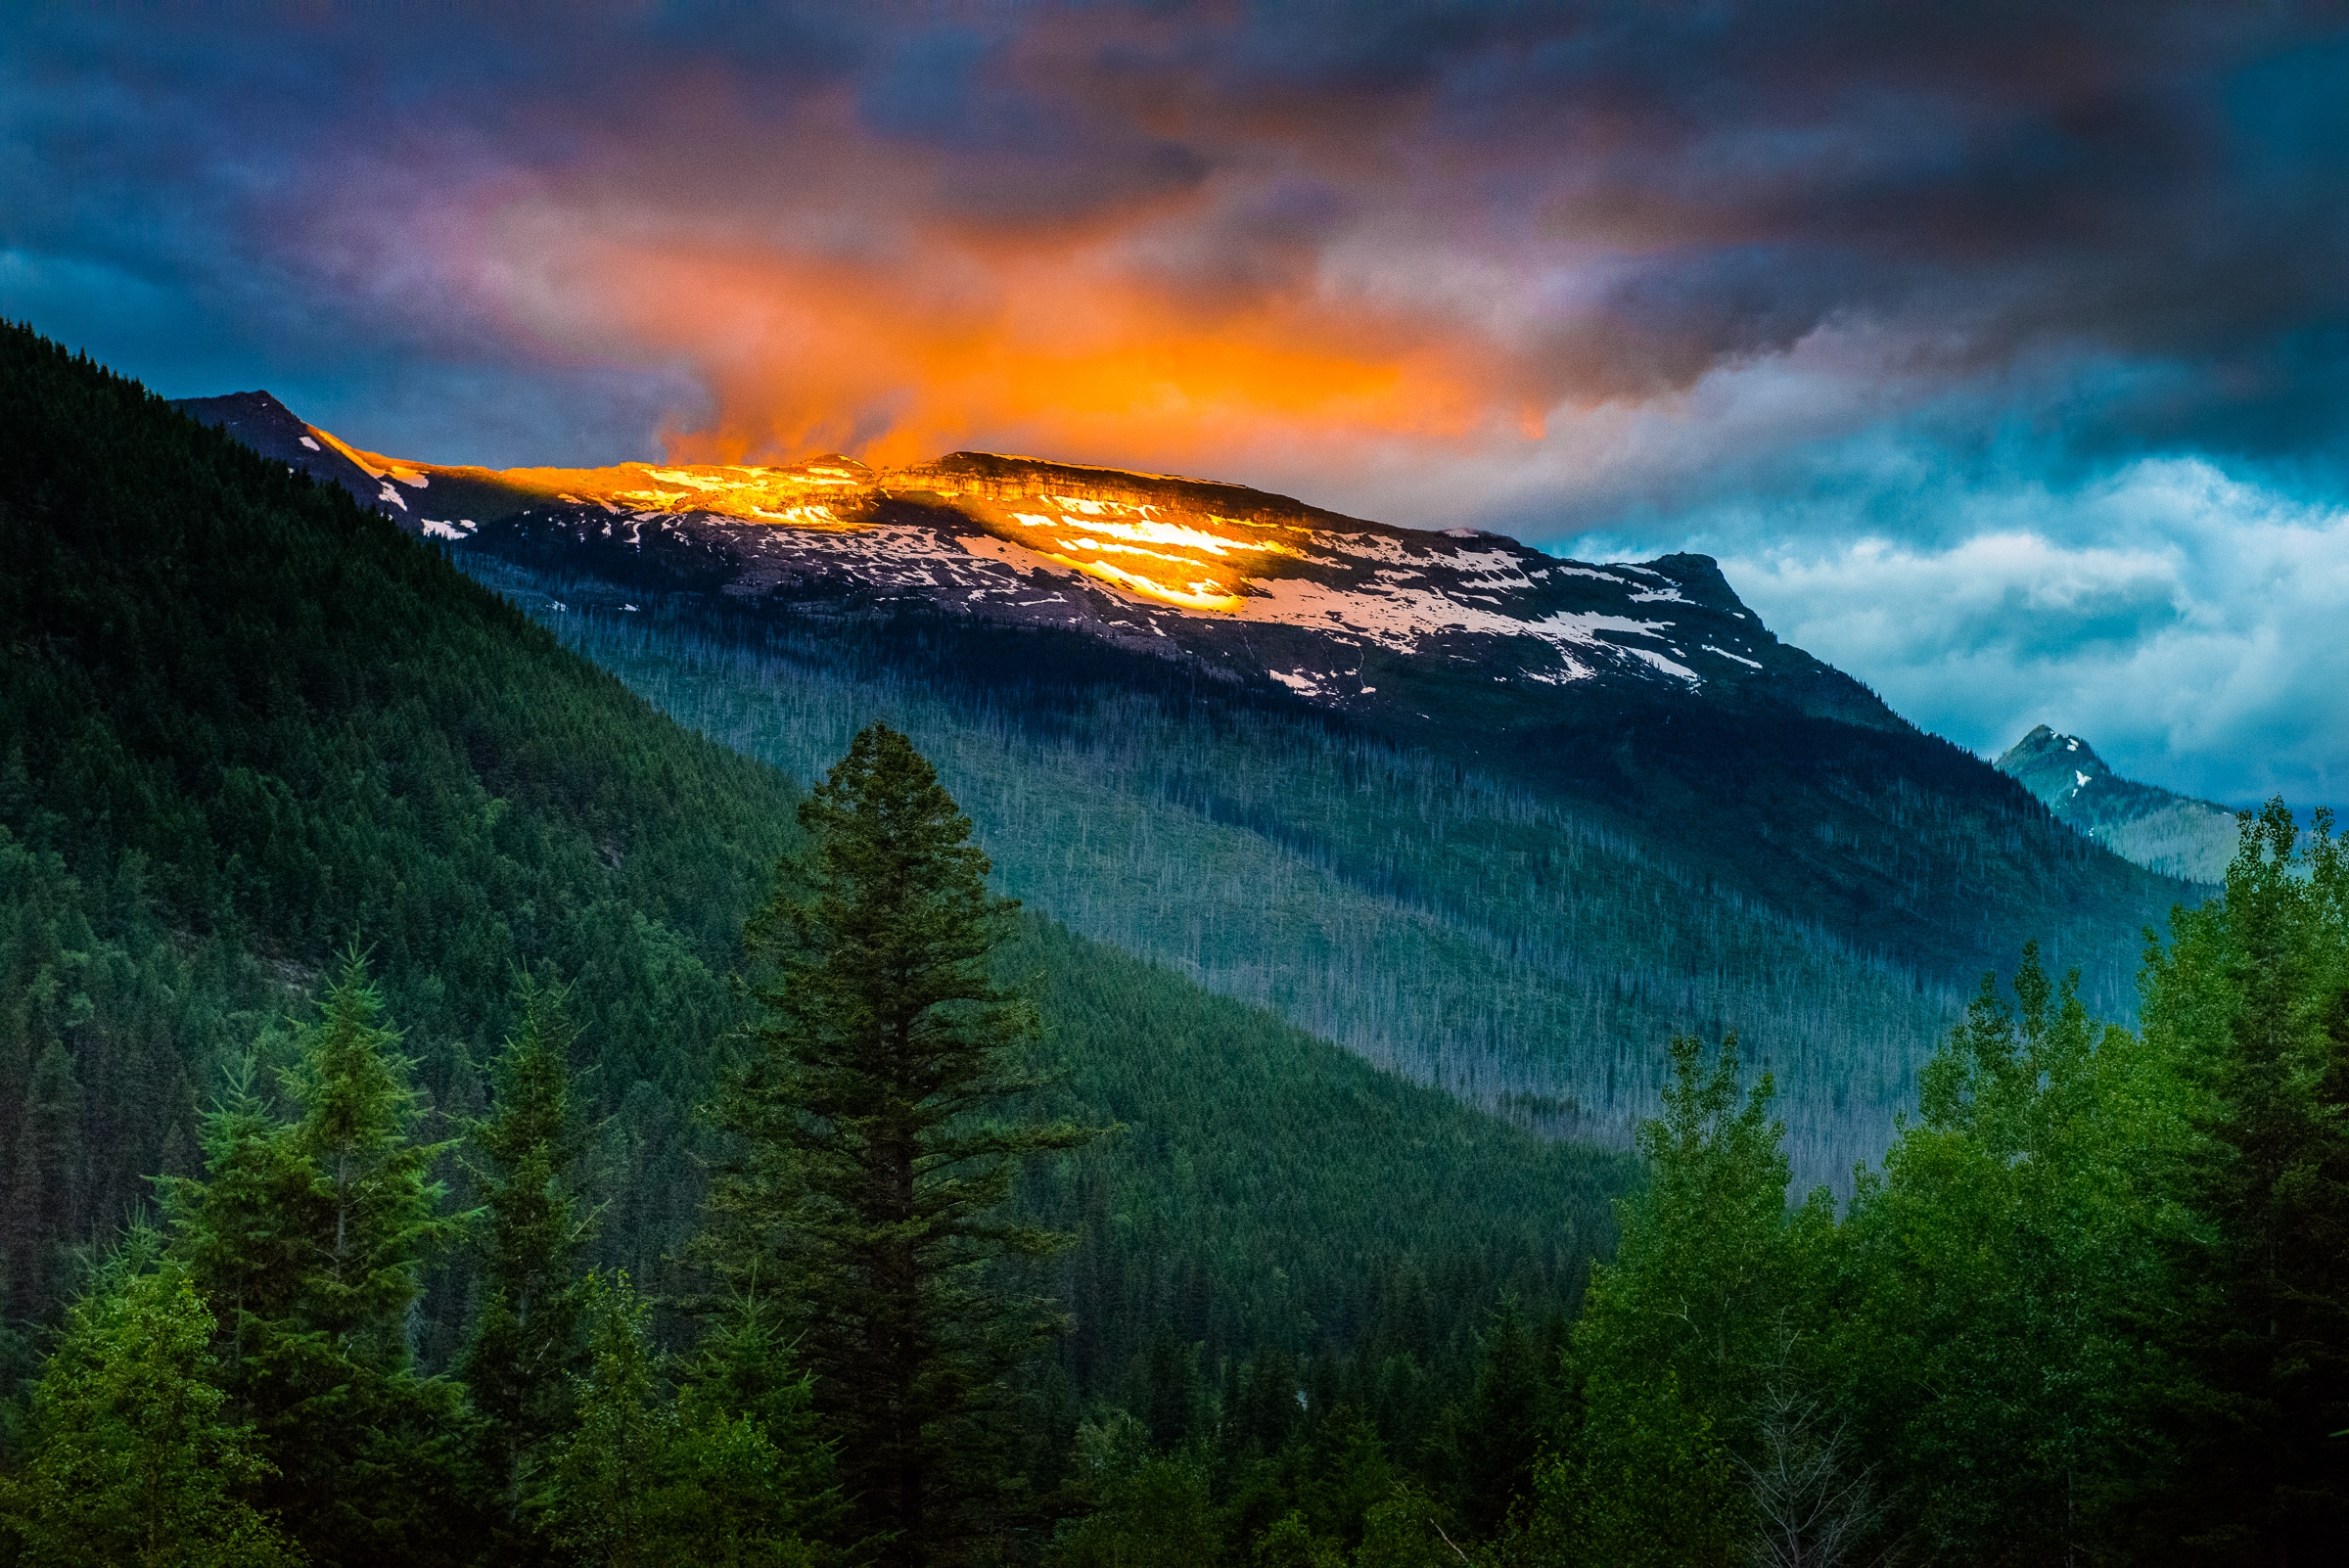 The rising sun breaks through the looming storm clouds to light up the snow atop Logan Pass in Glacier National Park in Montana.